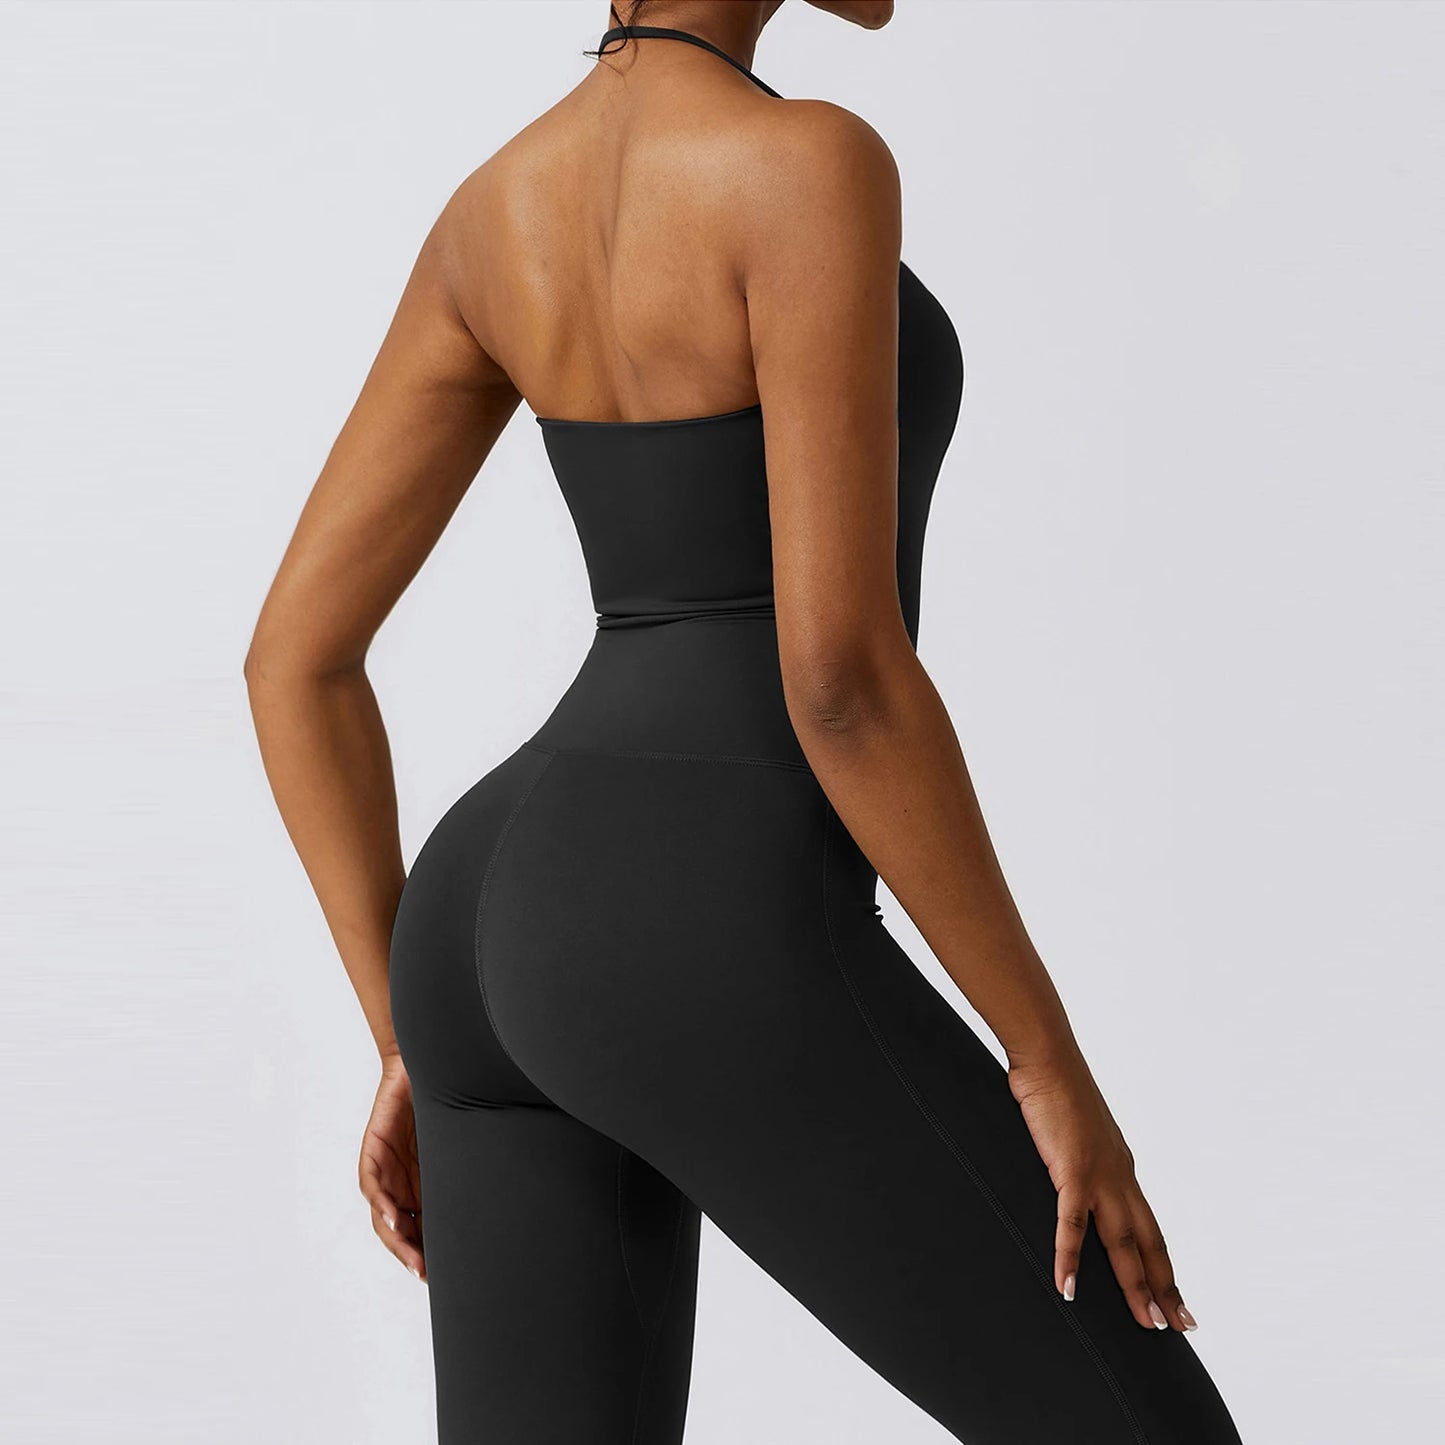 Bell Bottoms One-Piece Yoga Suit